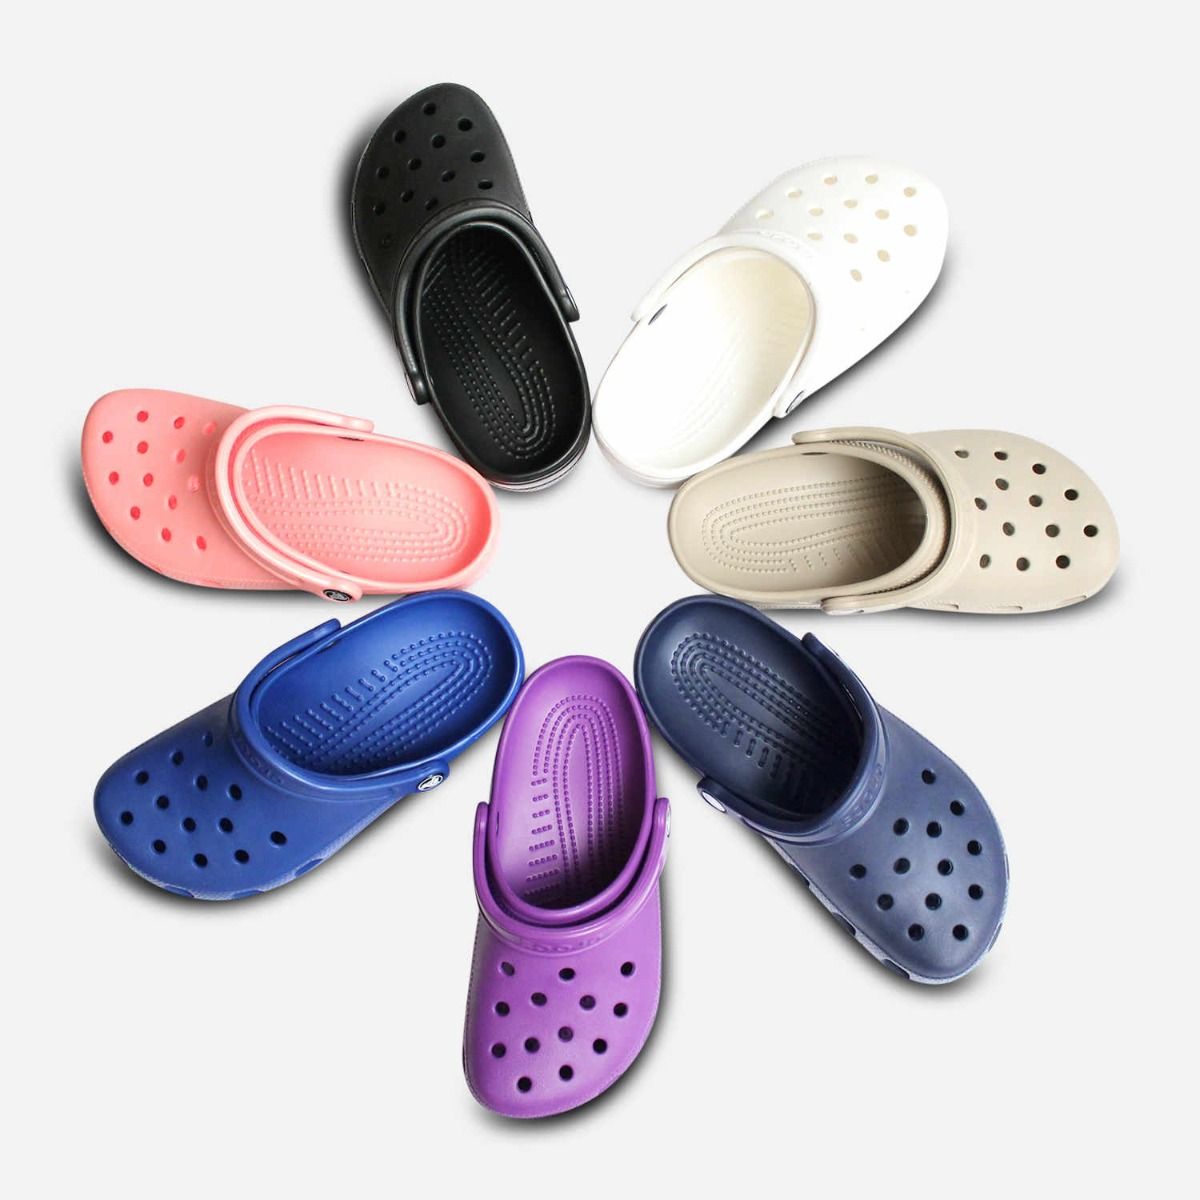 Crocs Classic Clog for Women in Navy Blue